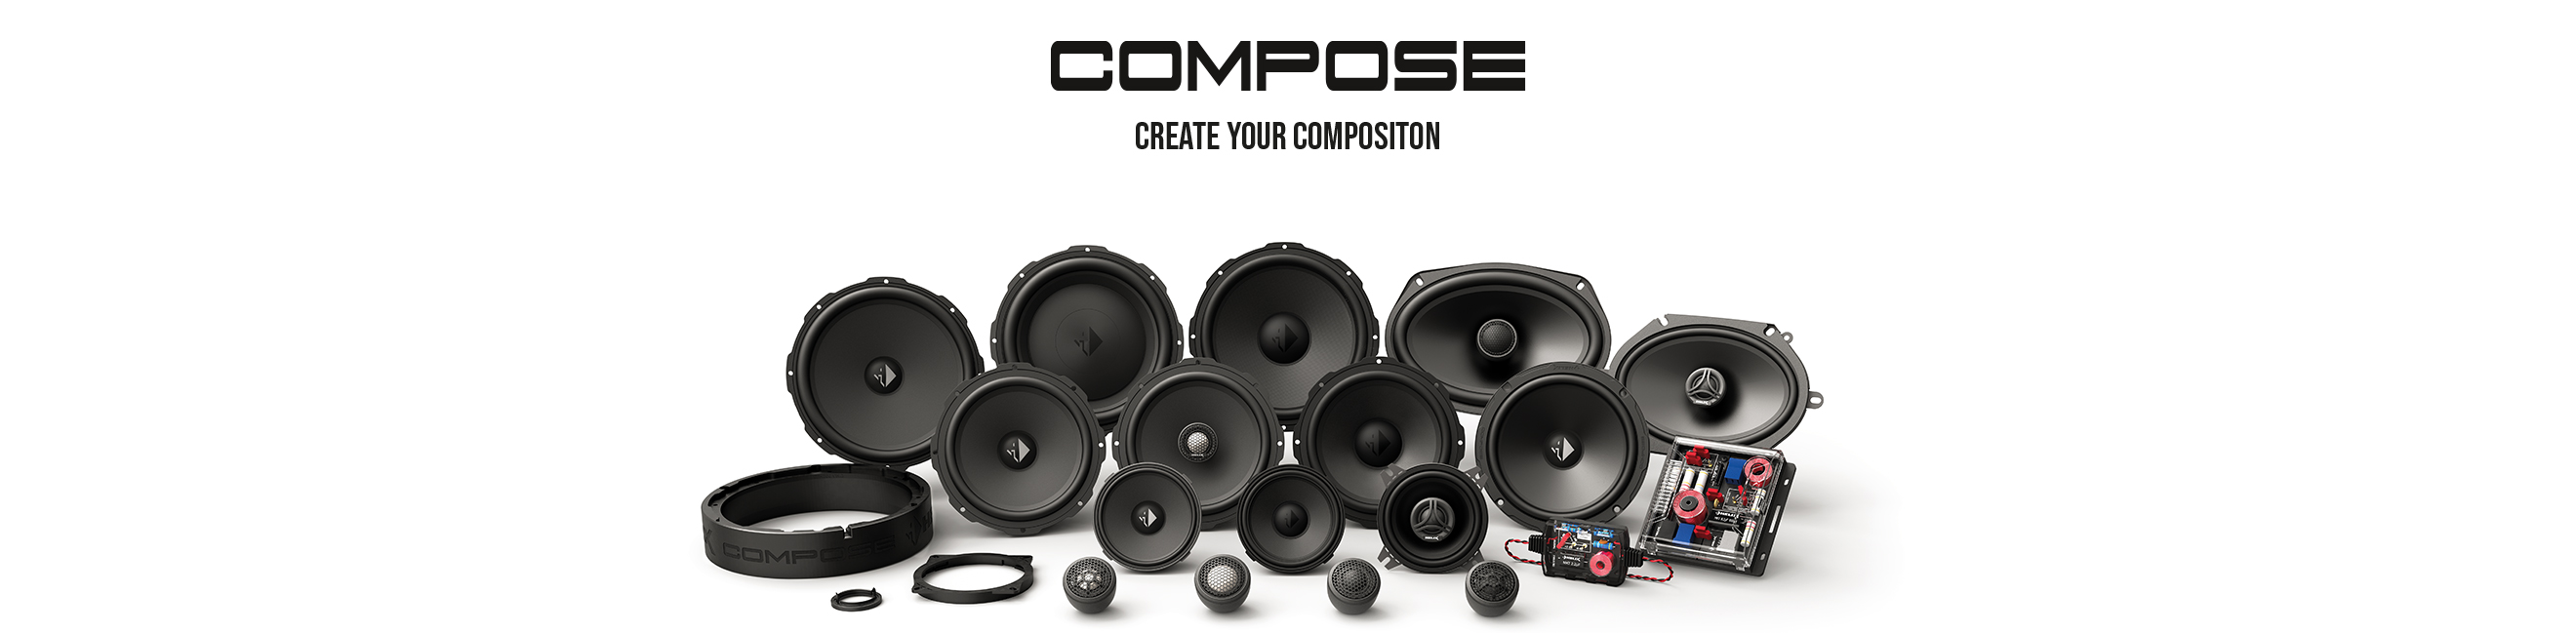 HELIX COMPOSE – Create Your Composition